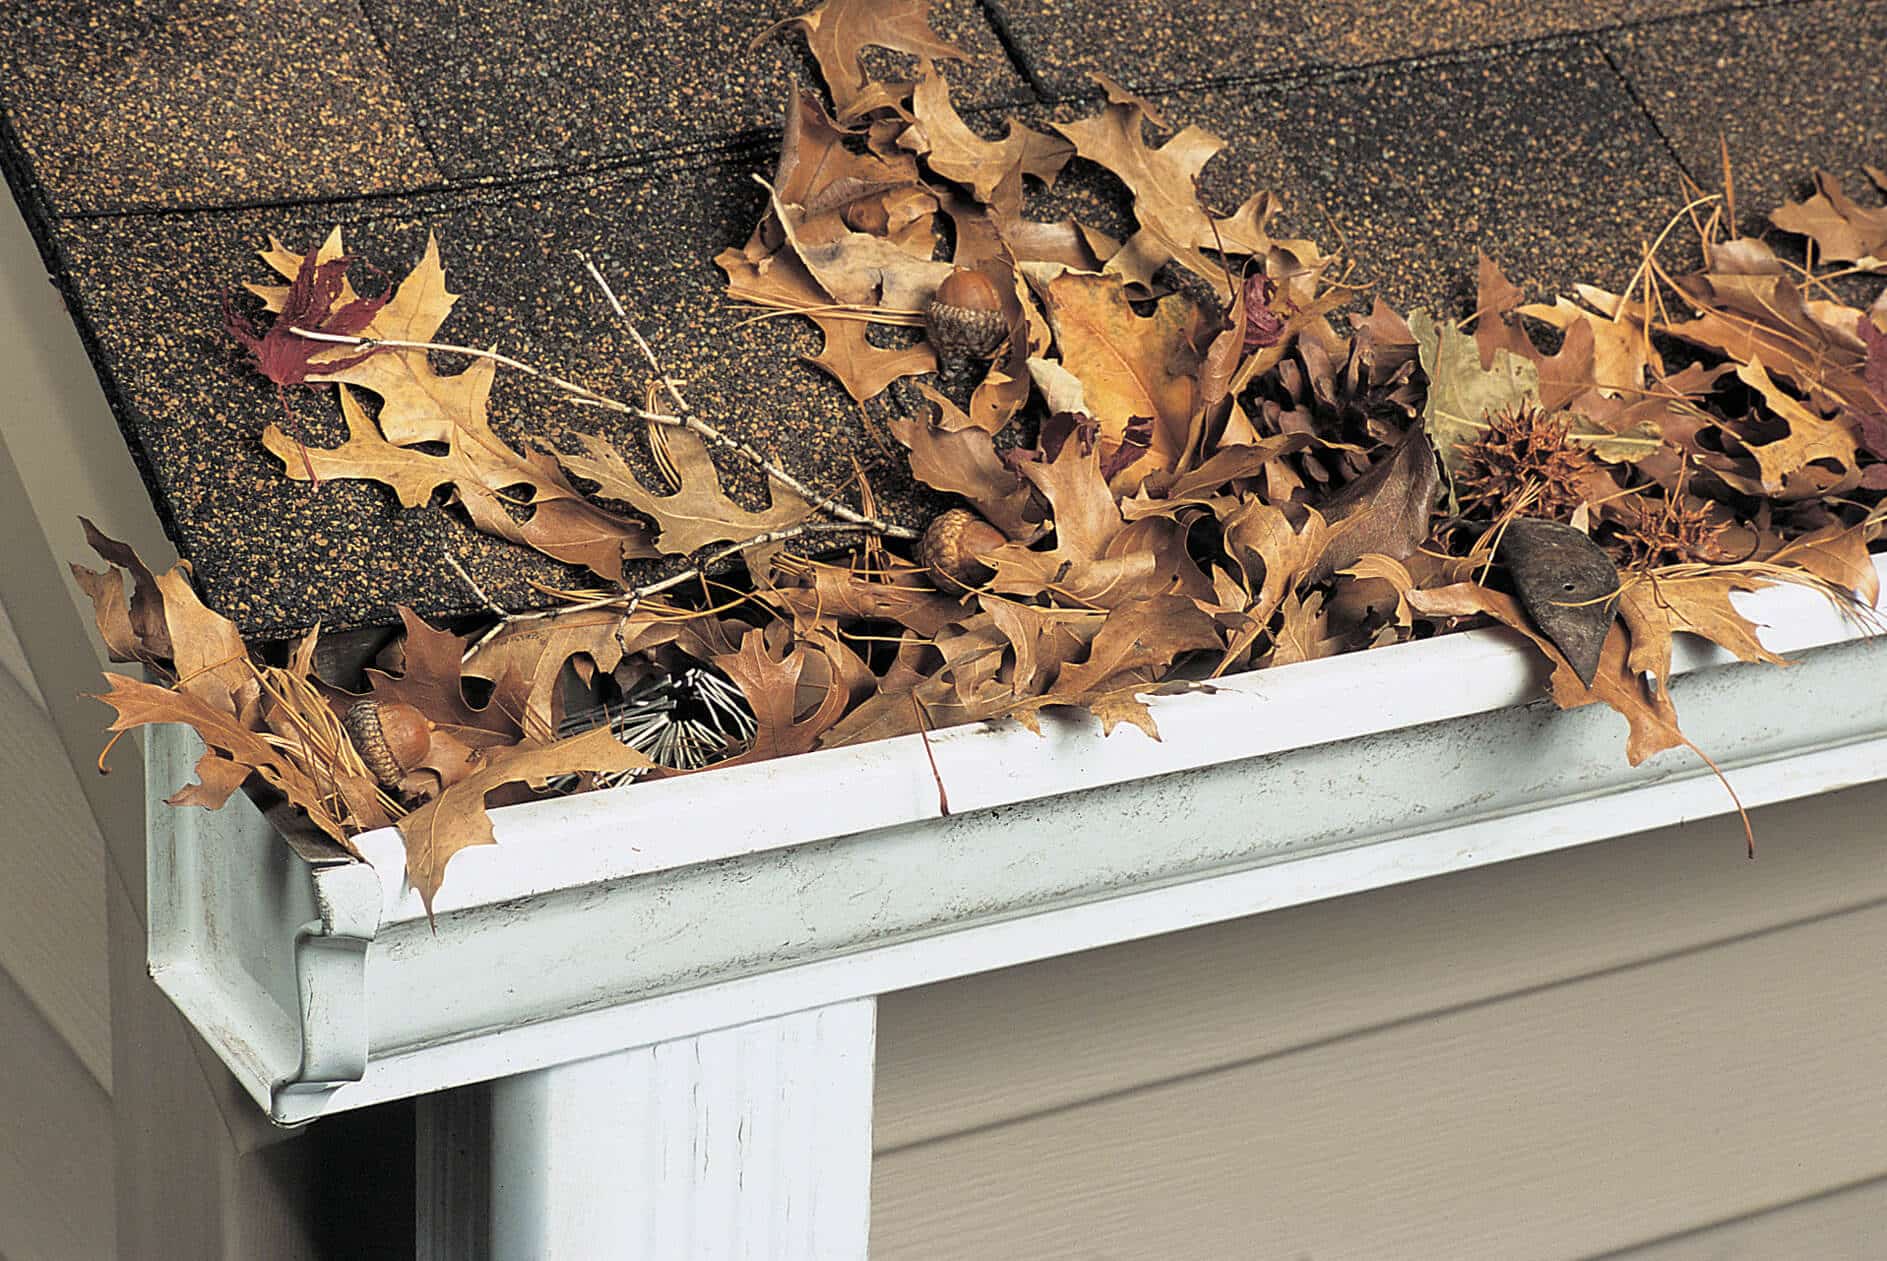 Picture of leaves falling on gutters.